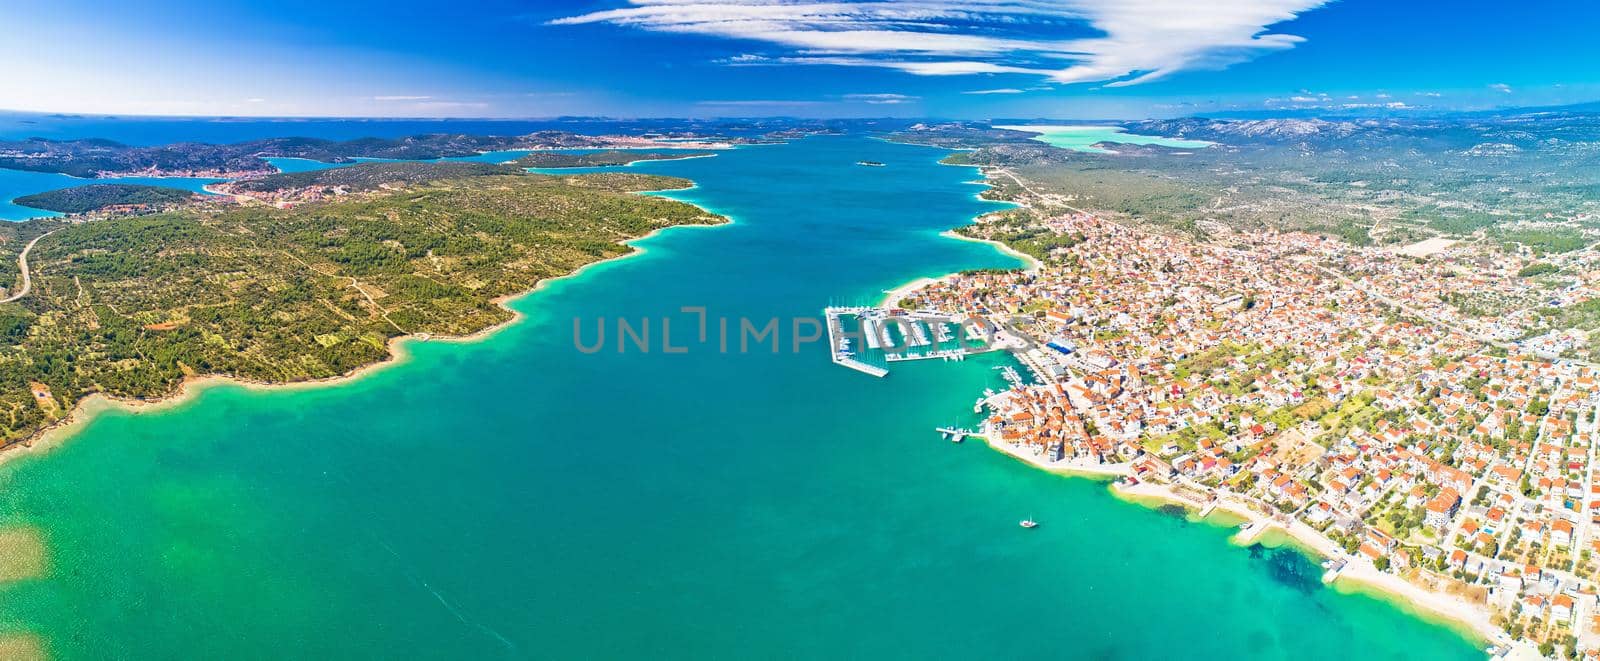 Adriatic town of Pirovac and Murter island panoramic aerial view by xbrchx